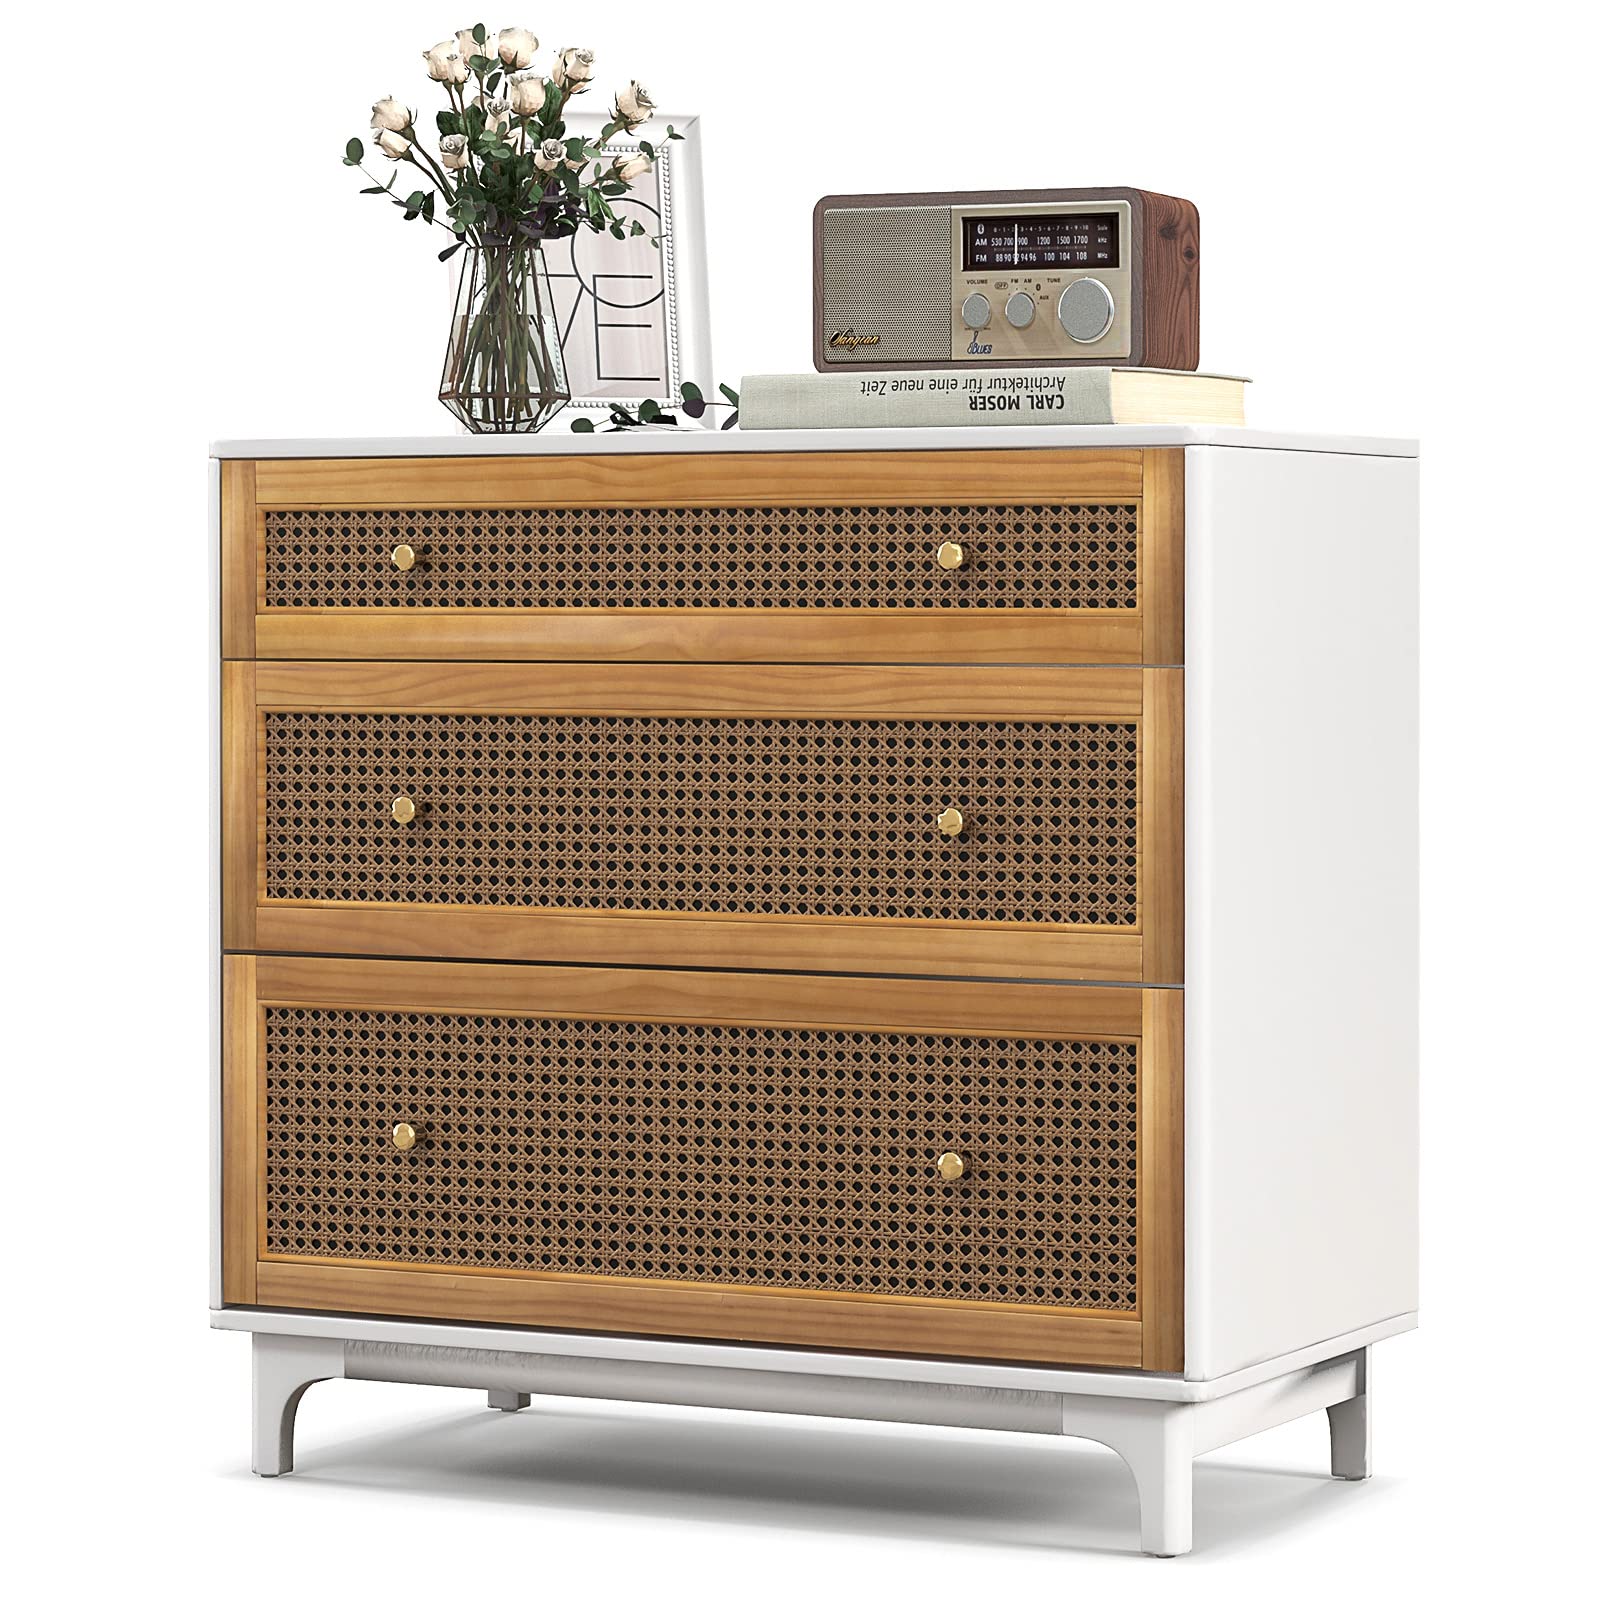 Giantex 3-Drawer Dresser Chest for Bedroom - Storage Chest of Drawers with Anti-toppling Device